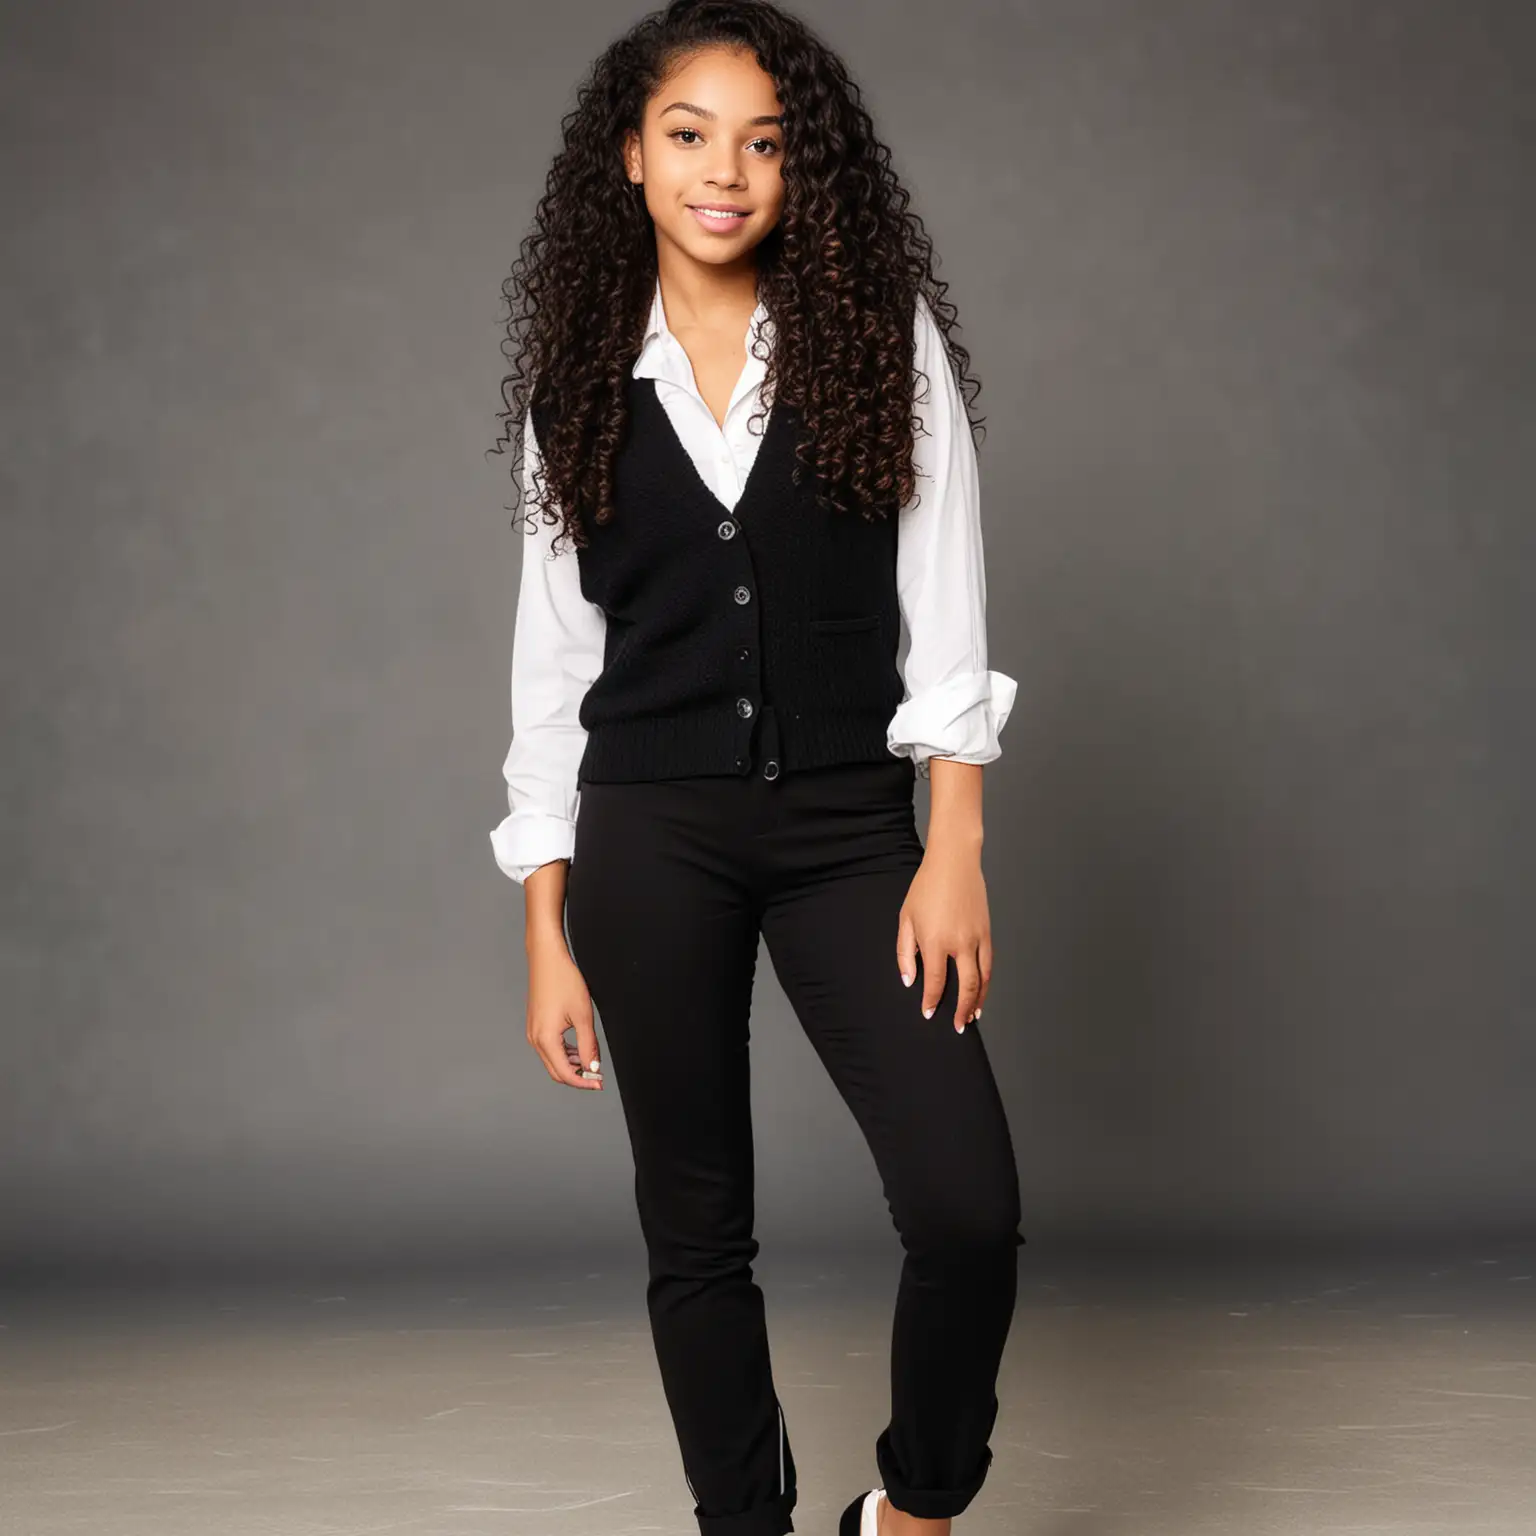 light skinned black teenage girl with long curly hair with black buttoned up sweater vest over white blouse and black pants with ballet flats 